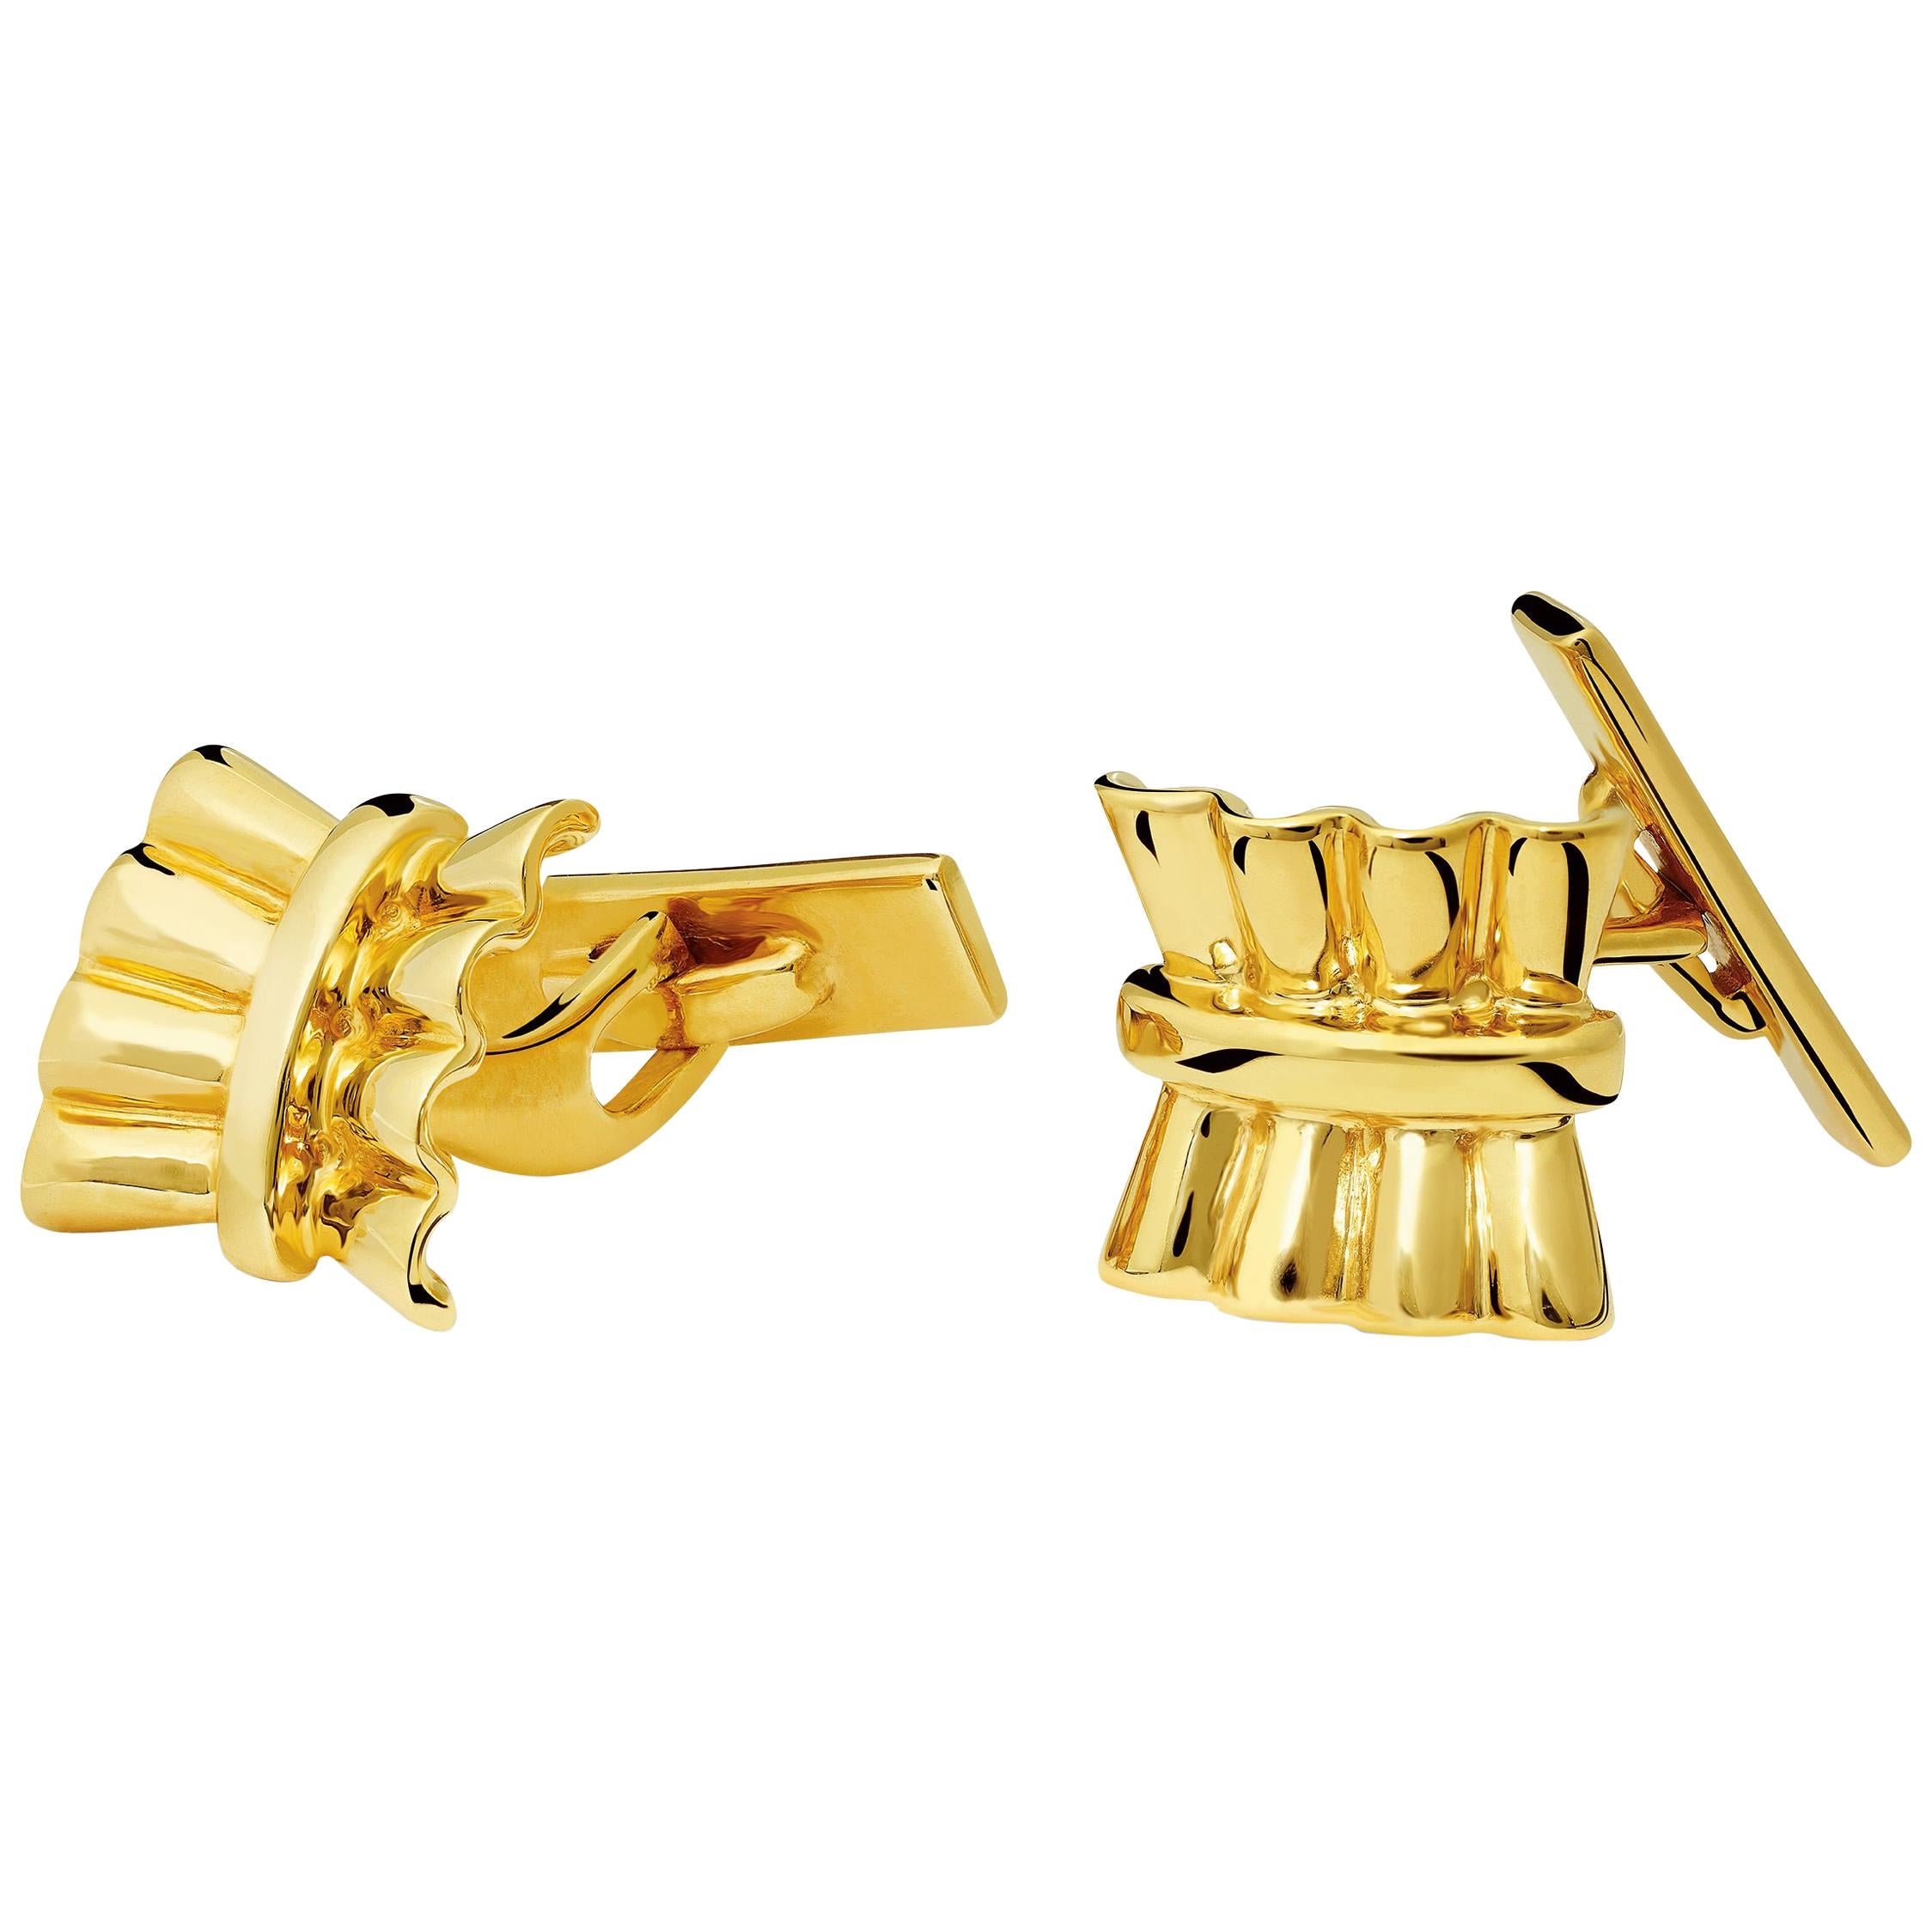 Uxmal Single Ended 9 Karat Yellow Gold Cufflinks For Sale